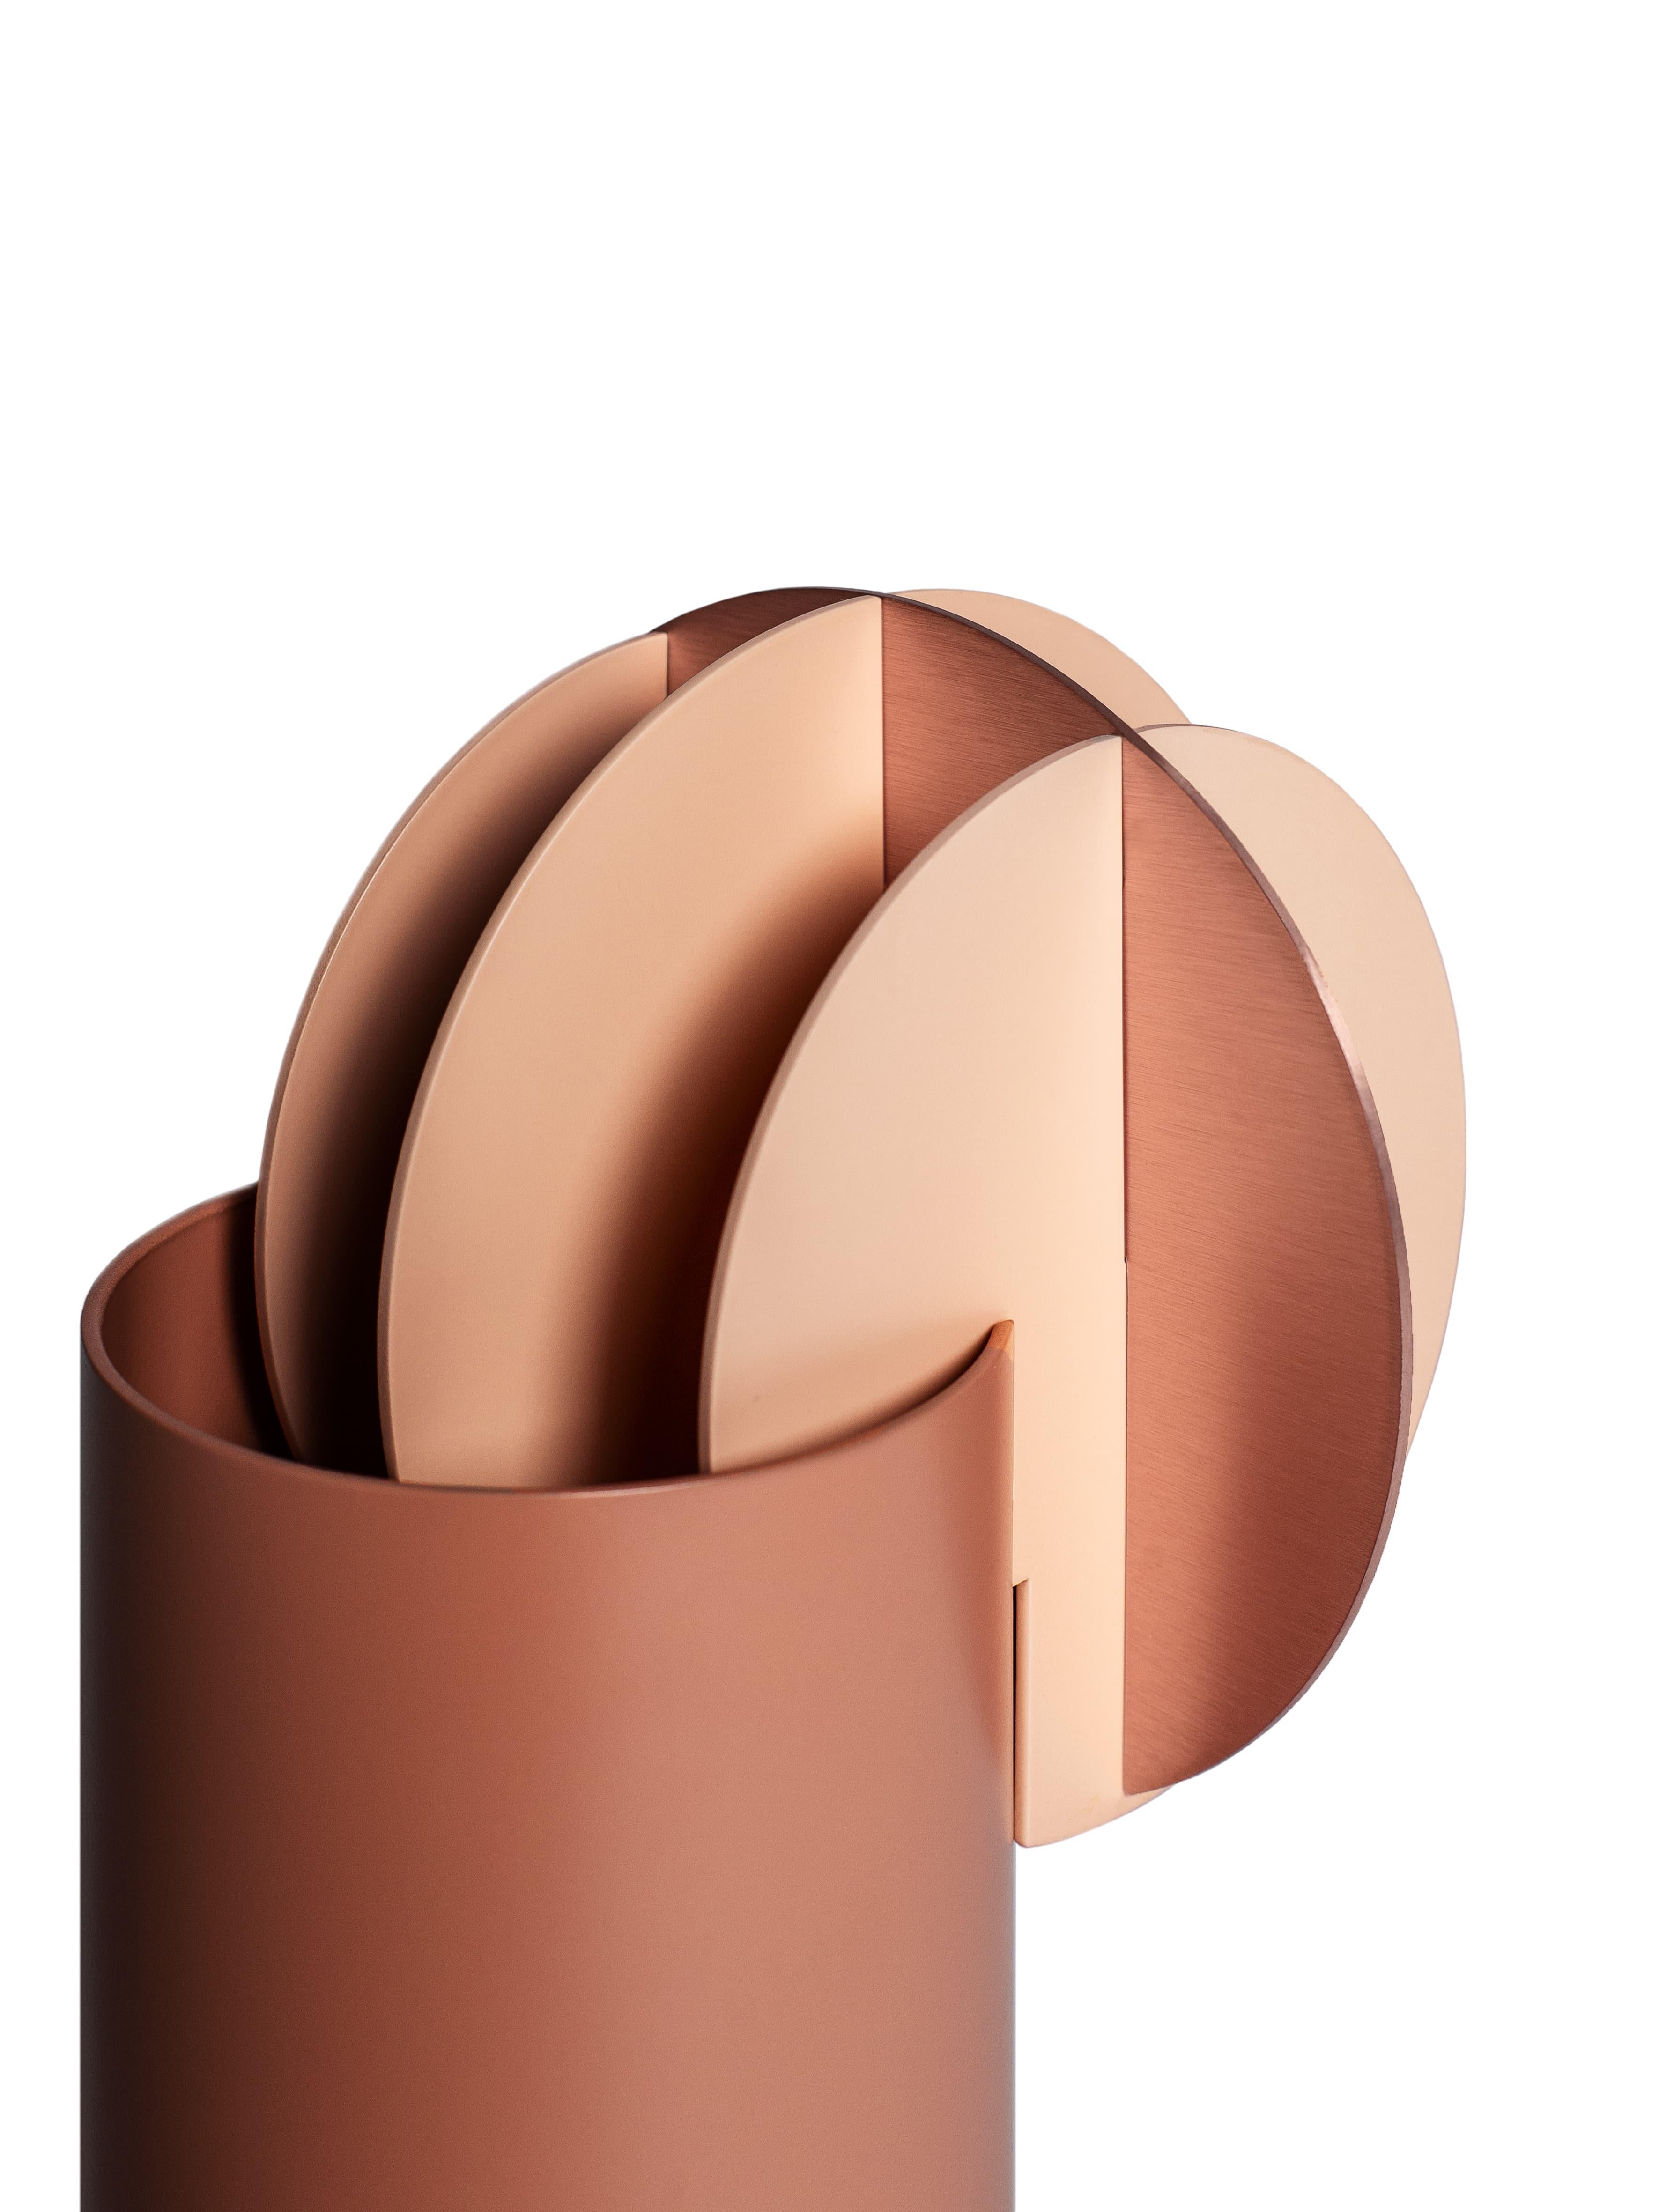 Modern Vase Delaunay CS7 by Noom in Copper and Steel 2